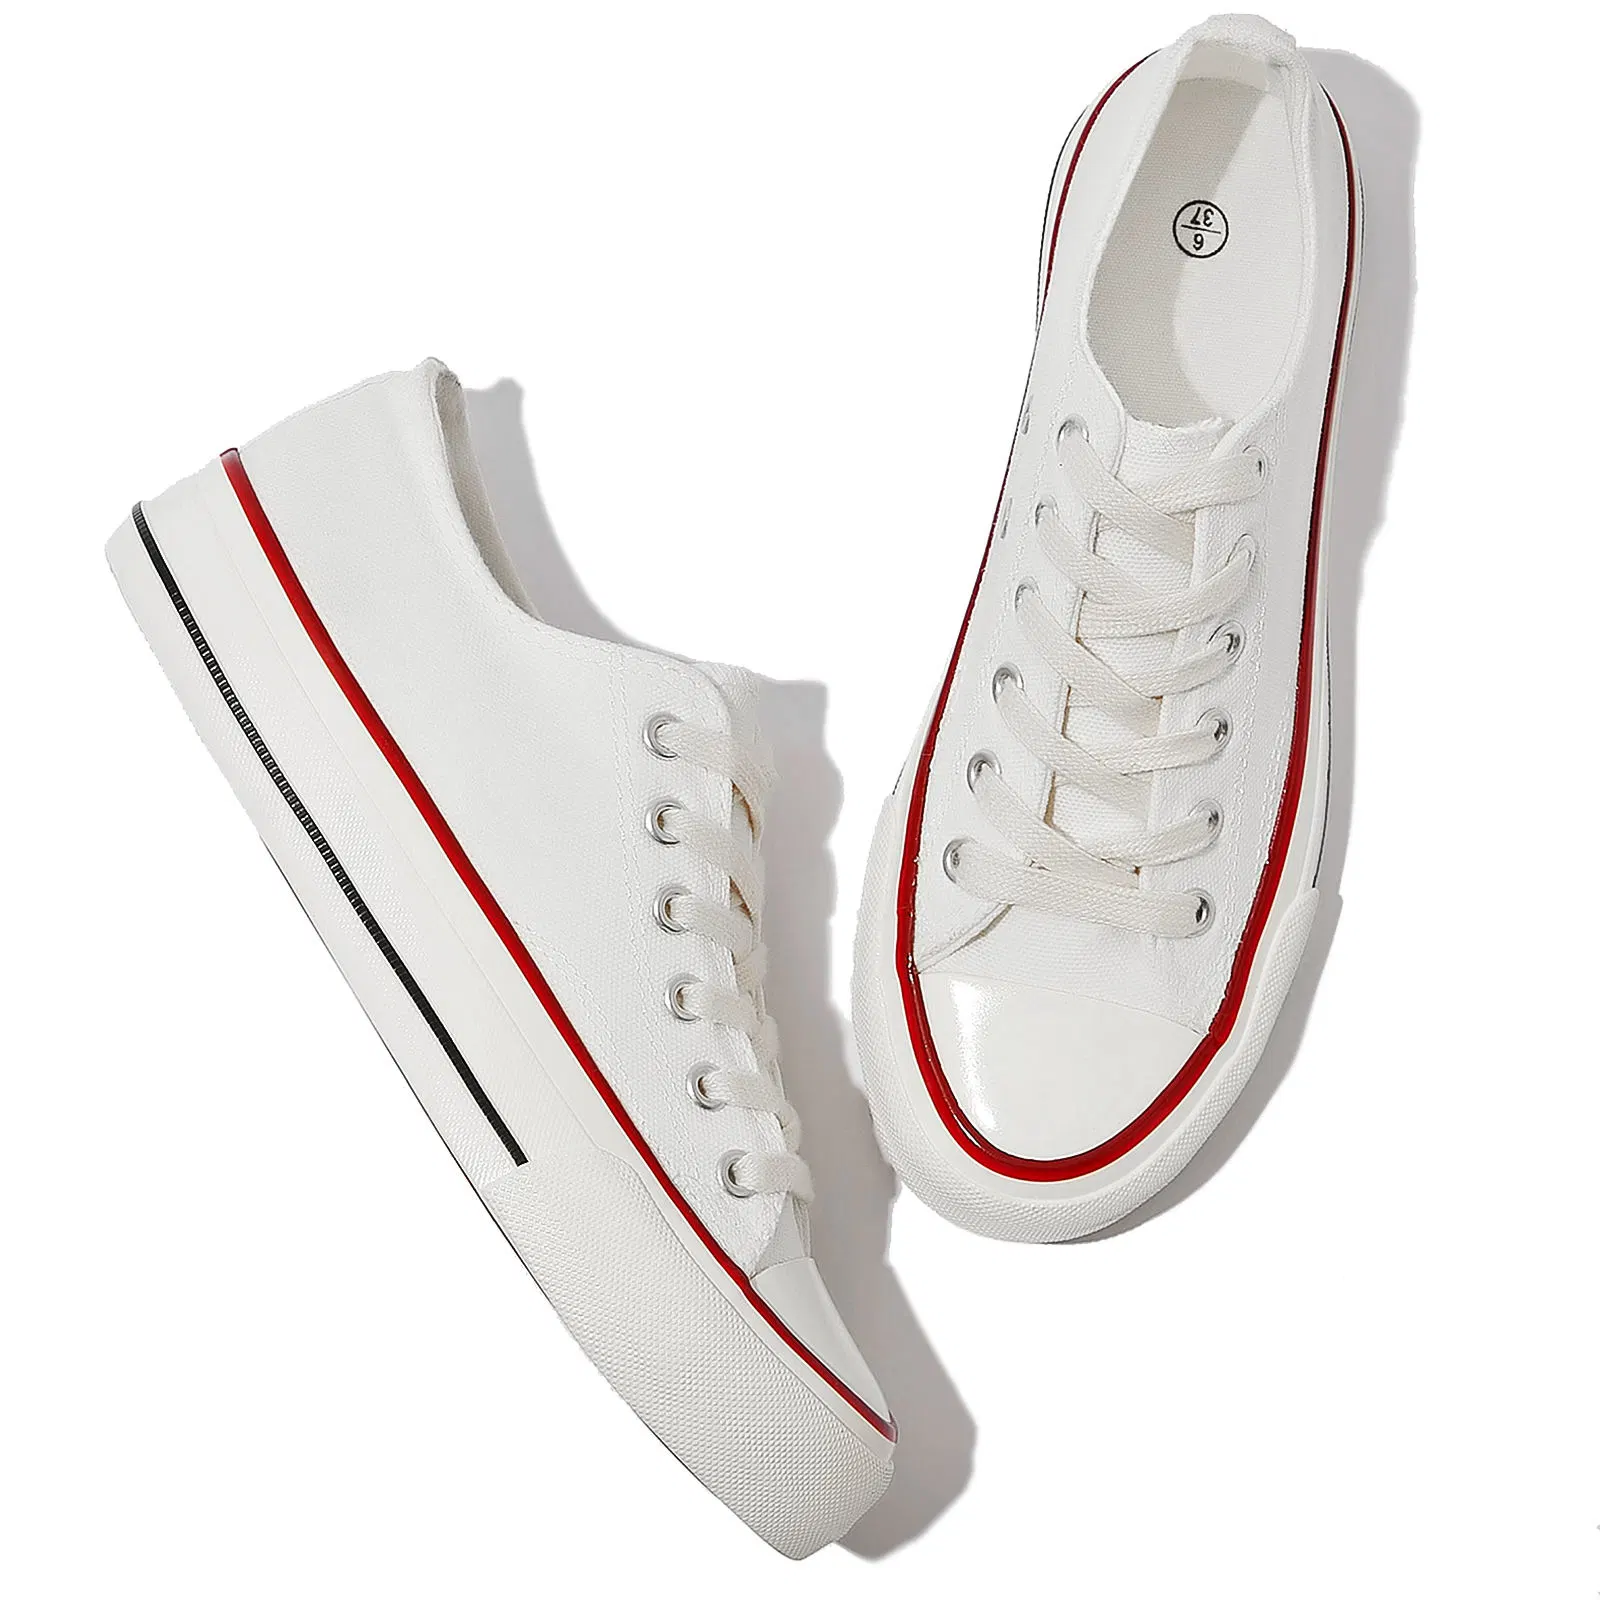 in Stock Canvas Shoes for Men and Women White Shoes Canvas Sneakers